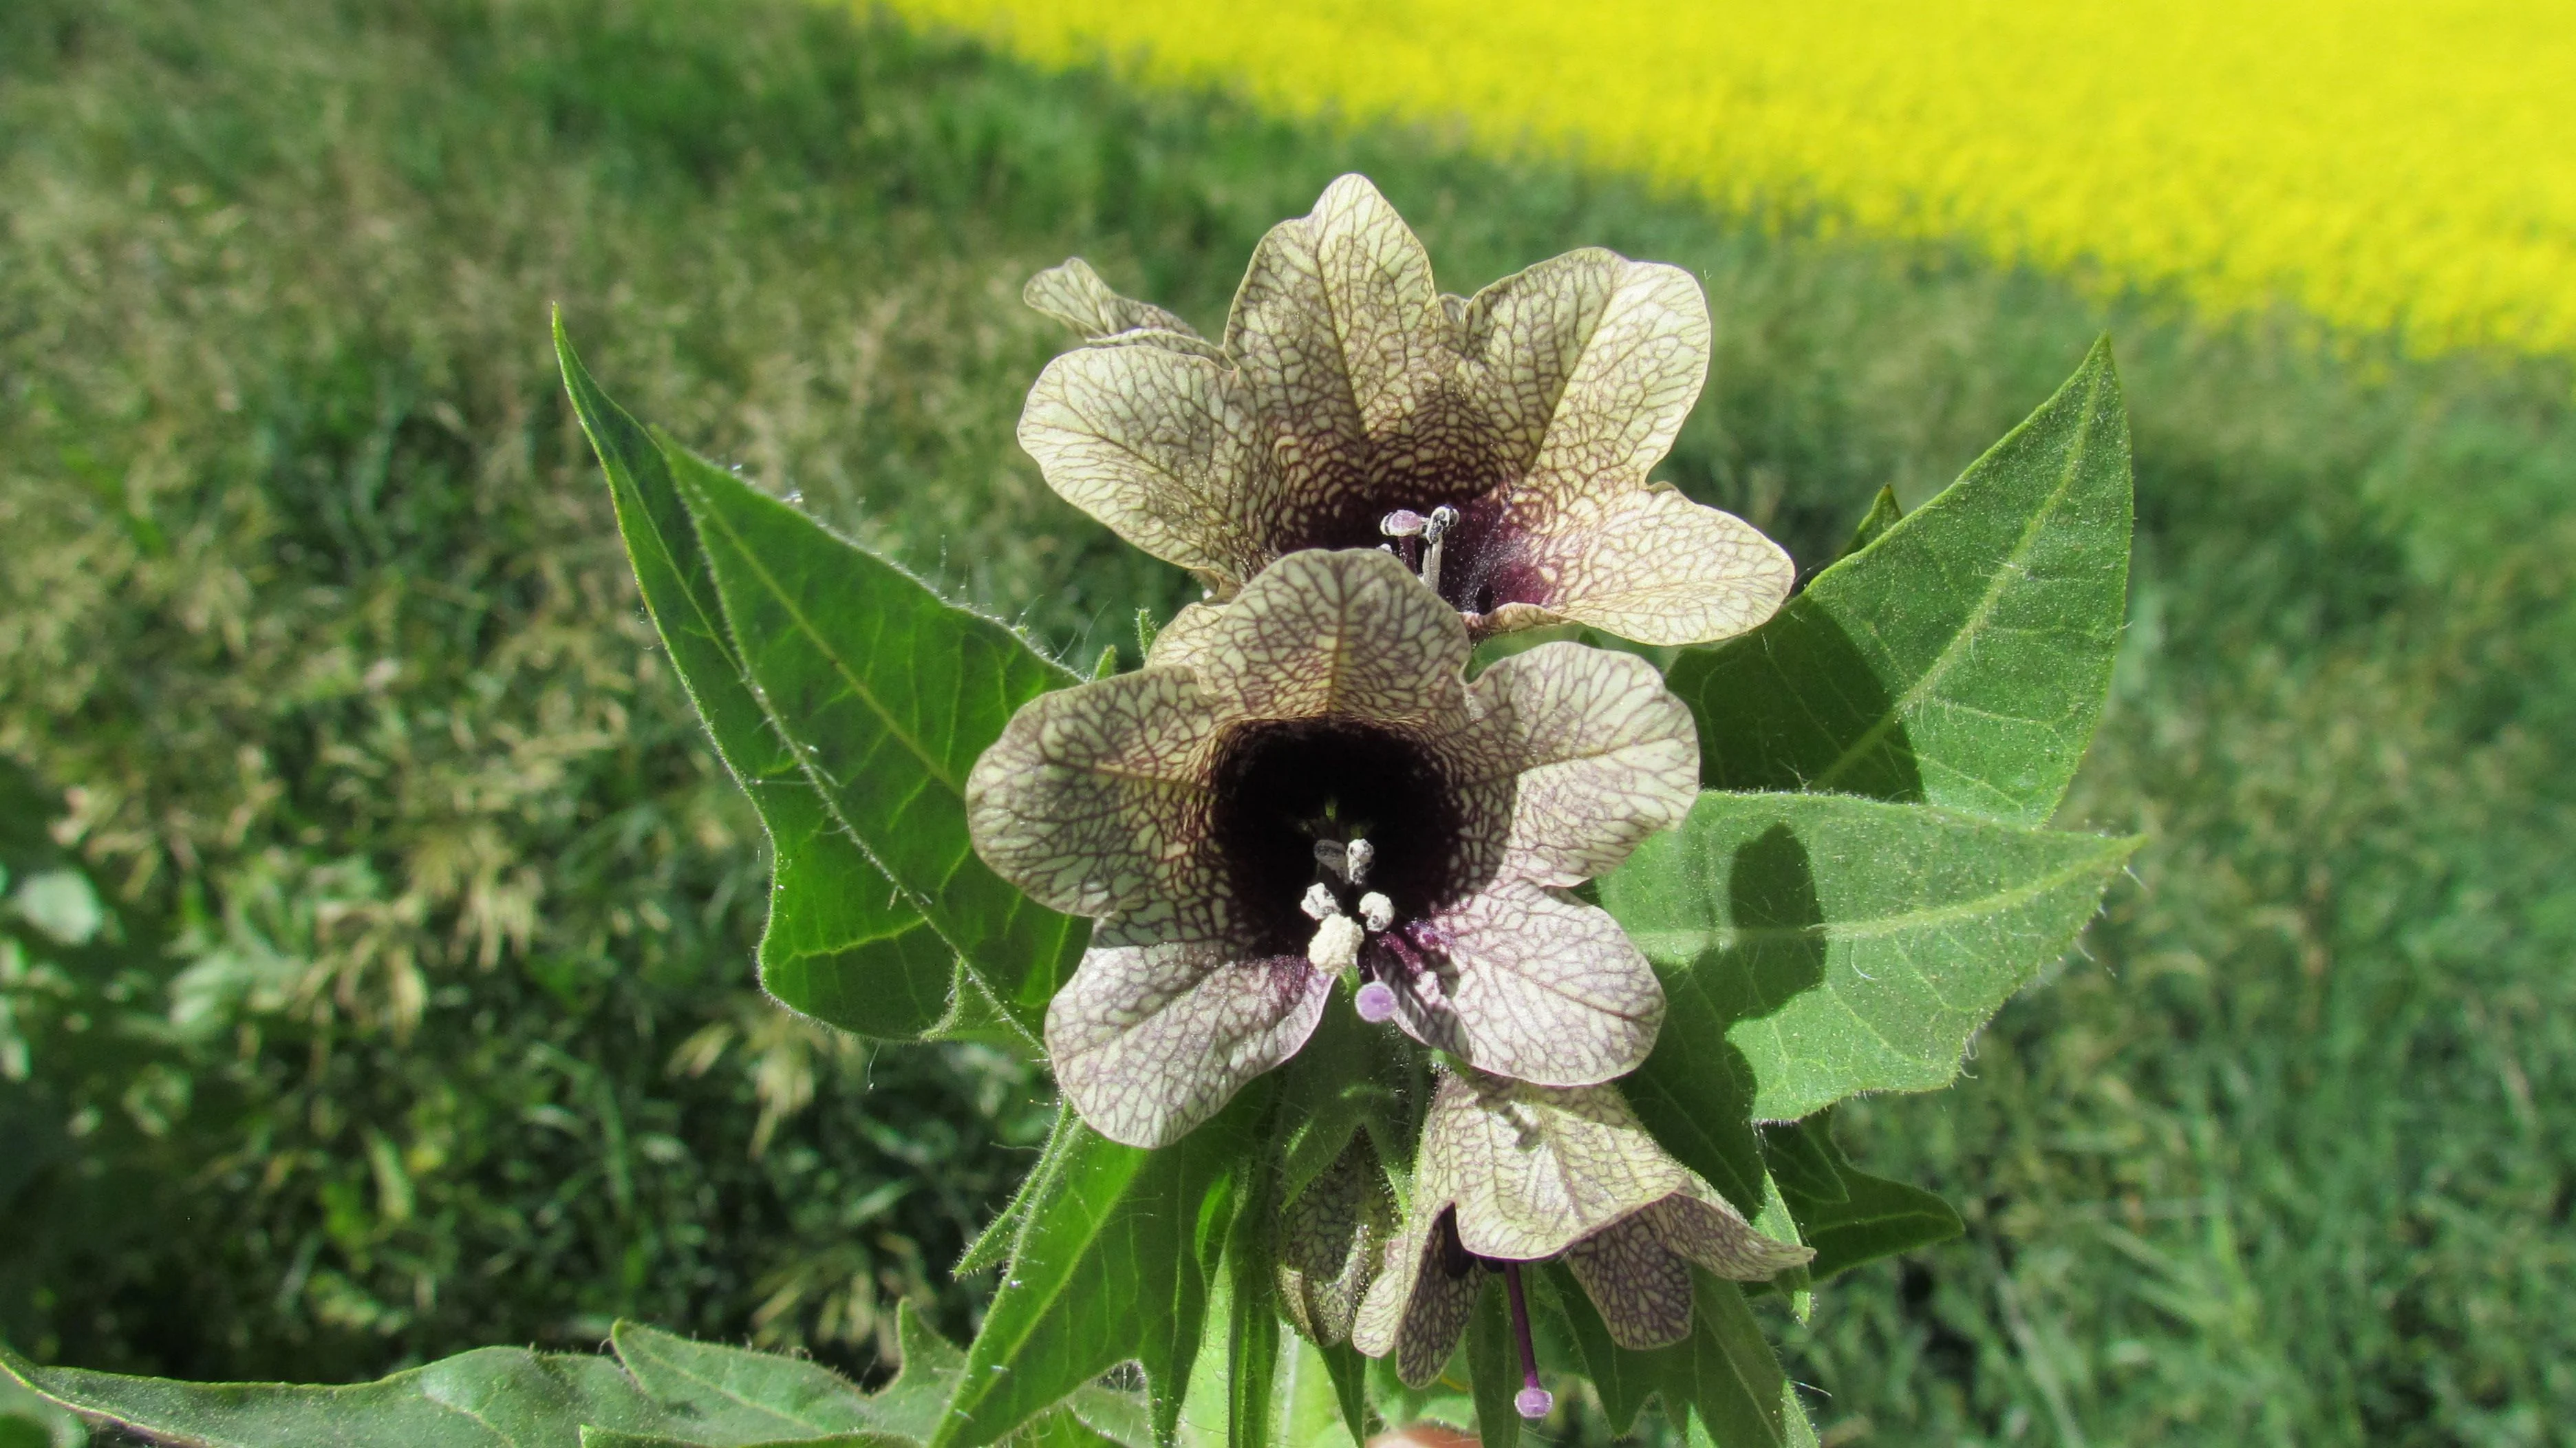 Learn more about black henbane, the invasive plant taking hold in Alberta